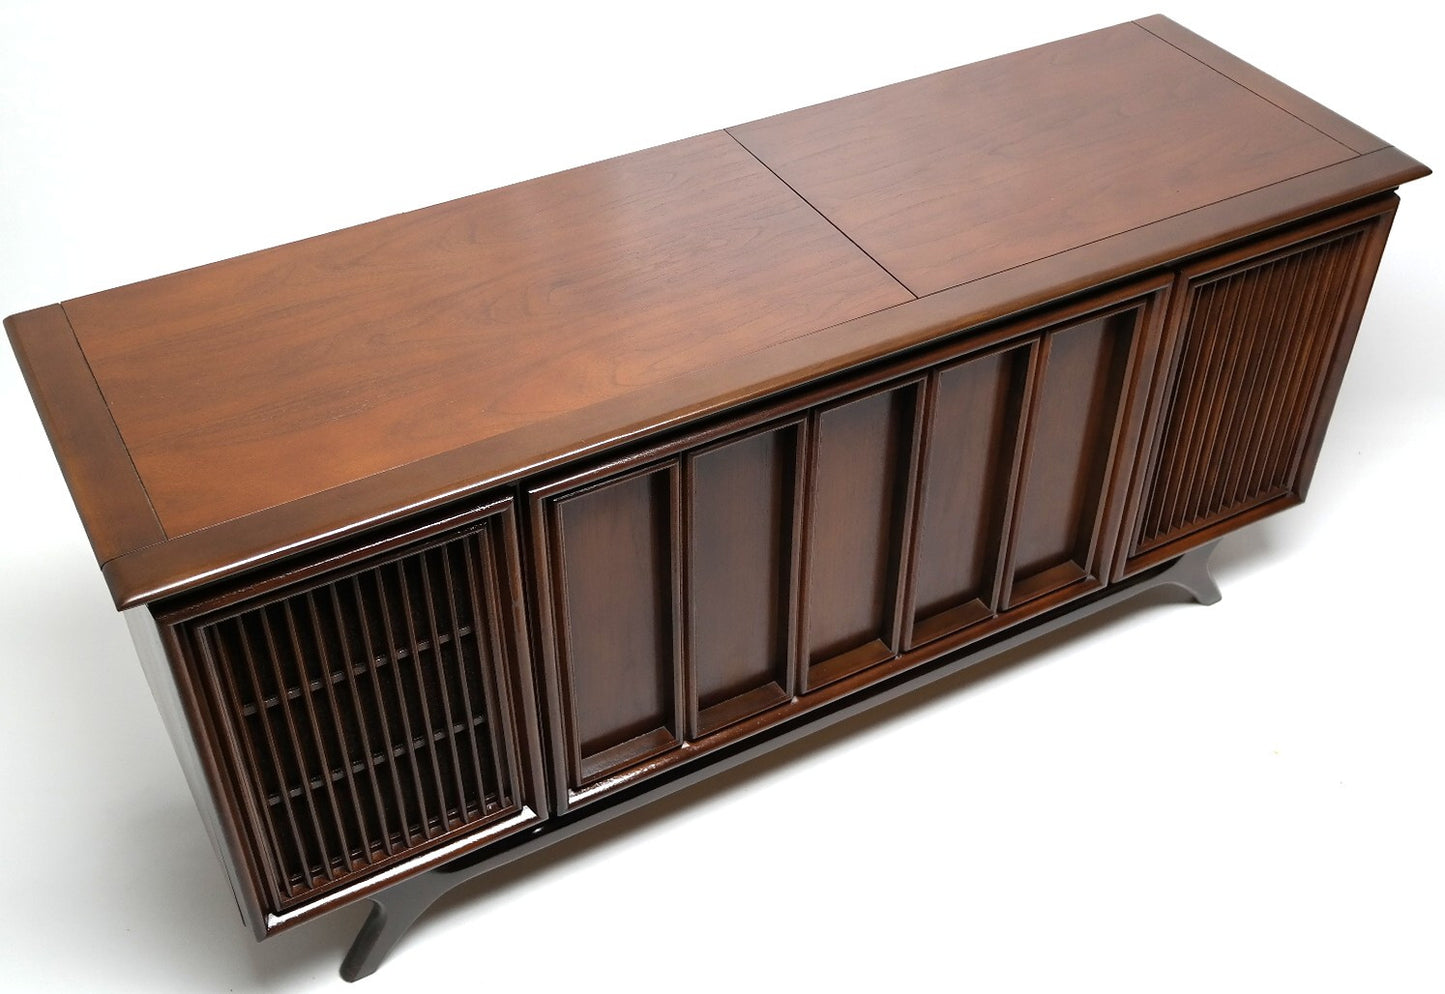 SOLD OUT*** - Mid Century Sylvania Stereo Console Record Player - Bluetooth iPod iPhone Android Input AM/FM Tuner The Vintedge Co.